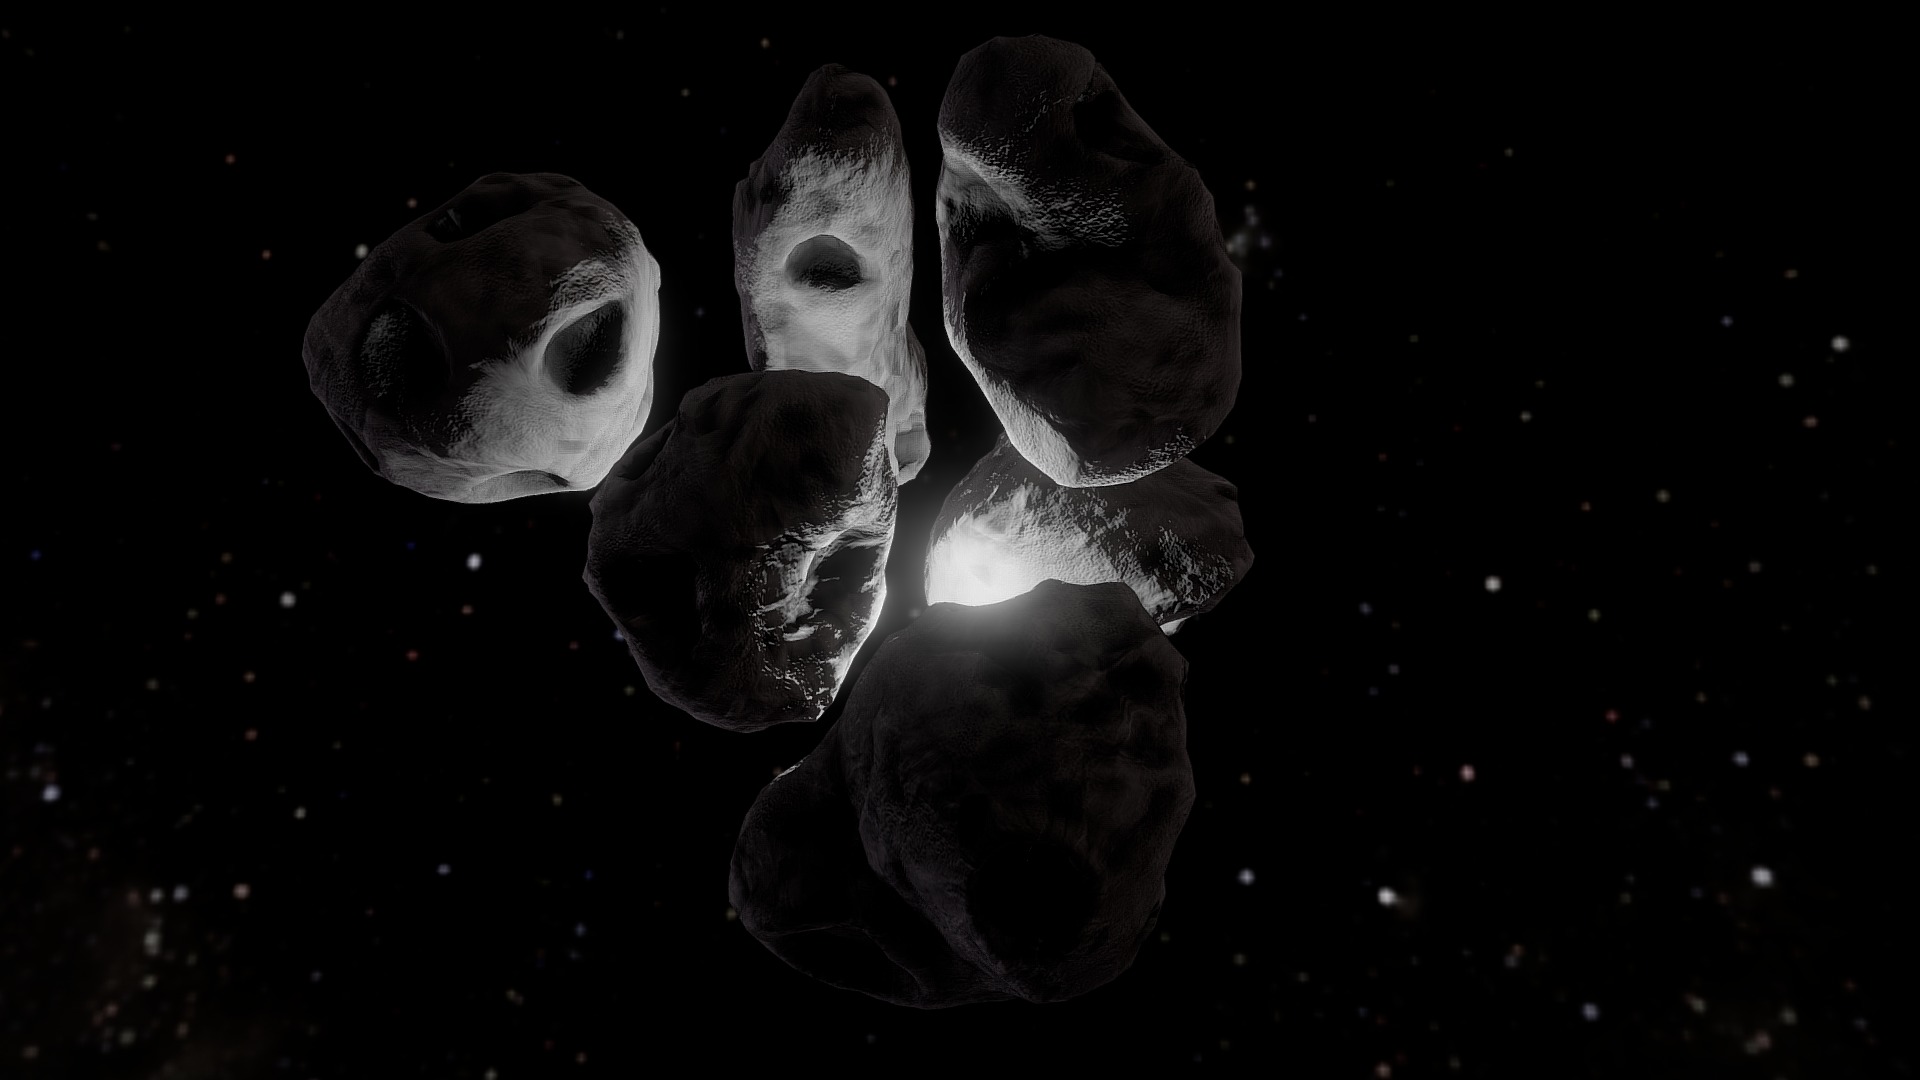 3D model Asteroids - This is a 3D model of the Asteroids. The 3D model is about a group of masks.